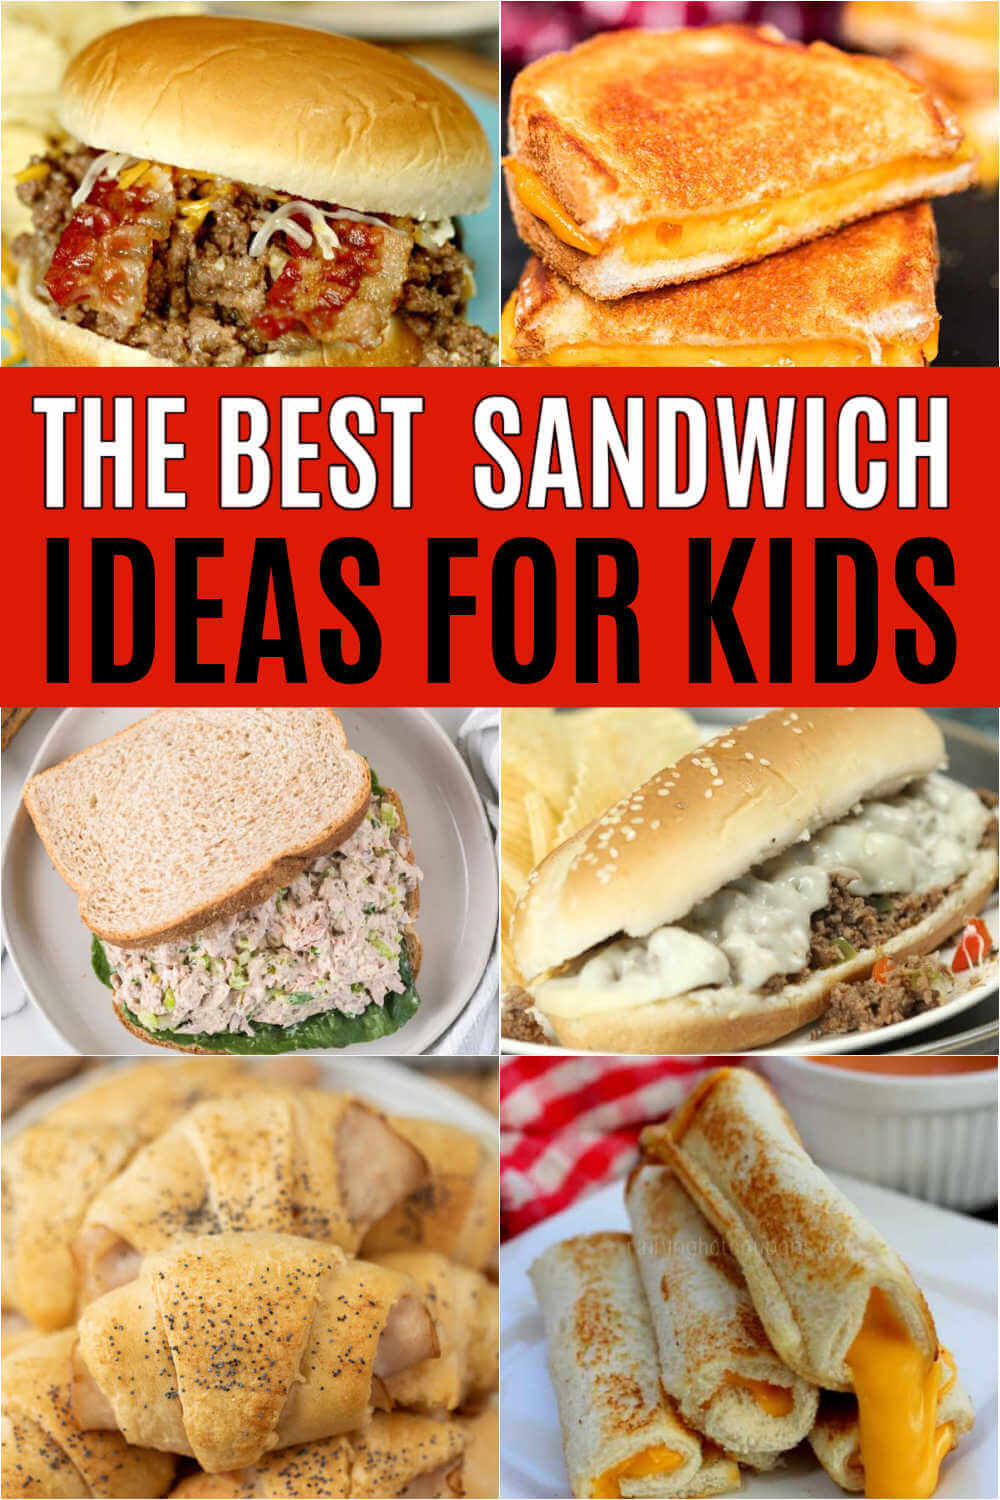 Lunch does not have to be boring with these tasty sandwich ideas for kids. We have ideas that even the pickiest eaters will enjoy. These are the best sandwich ideas for lunch or for dinner! #eatingonadime #sandwichrecipes #sandwichideas 